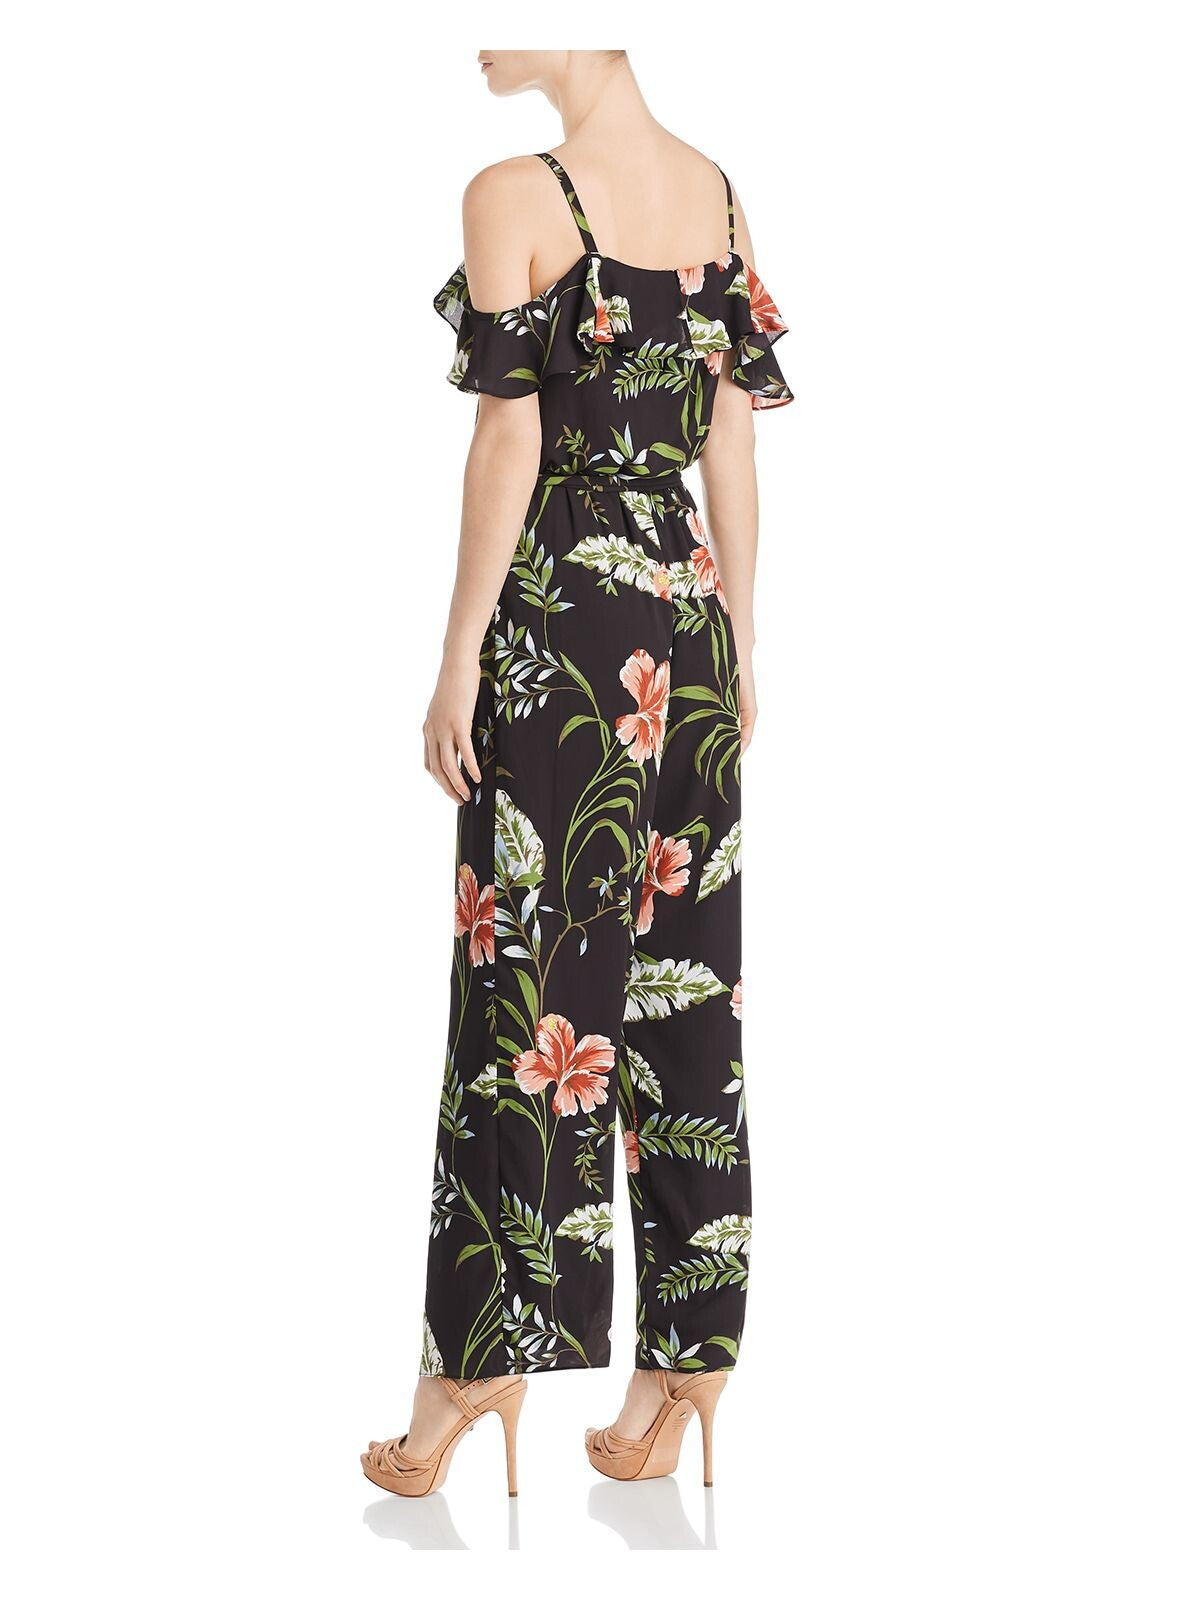 ADRIANNA PAPELL Womens Black Cold Shoulder Floral Spaghetti Strap V Neck Wide Leg Jumpsuit 14